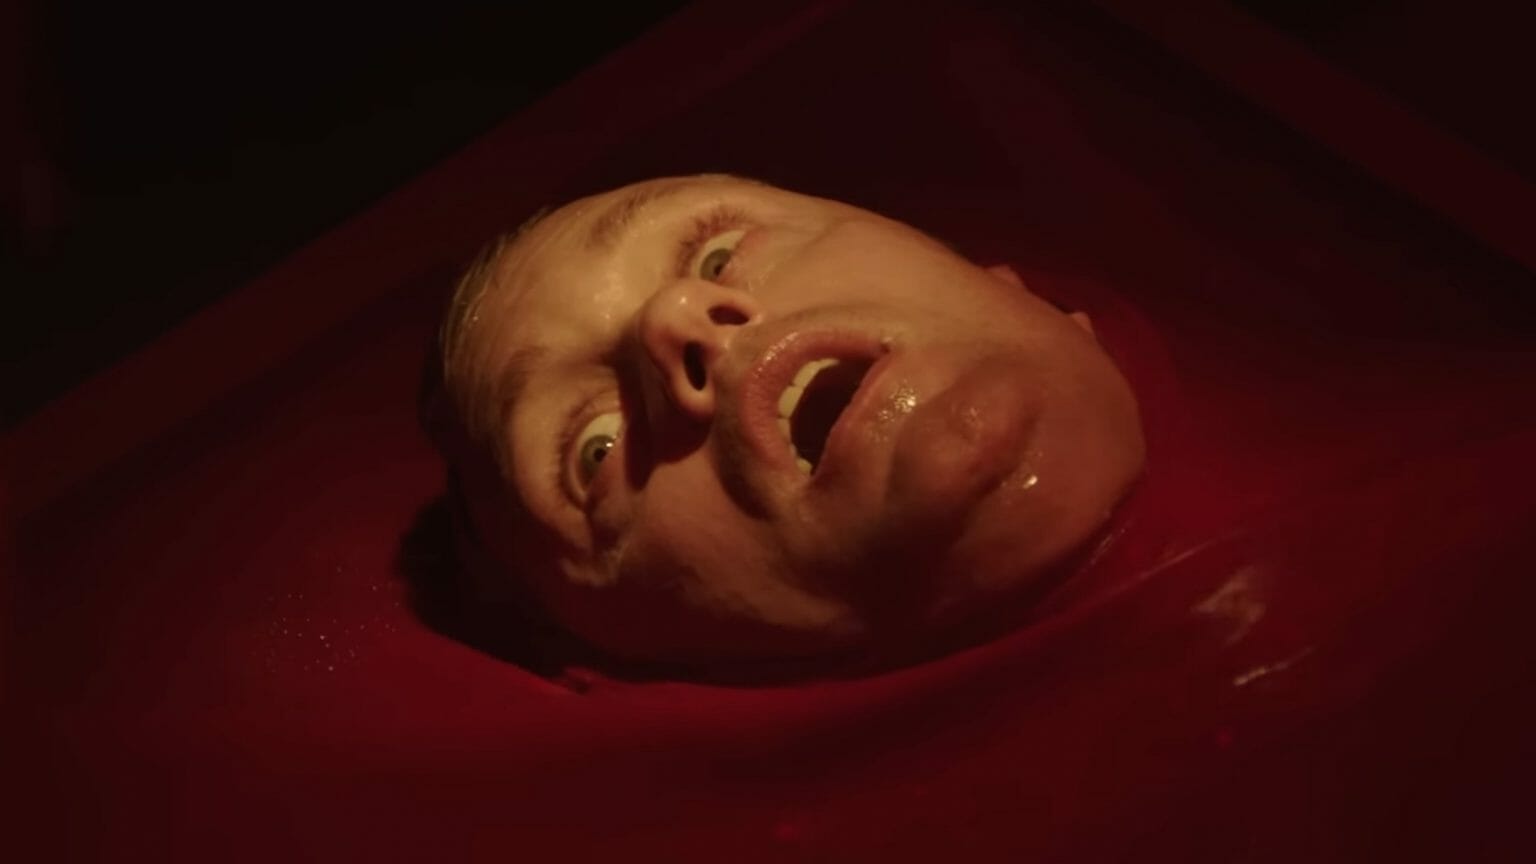 The face of a newborn Alexander Skarsgård clone wakes up shocked in fear from a red rubber looking vessel in the body horror film INFINITY POOL directed by Brandon Cronenberg.